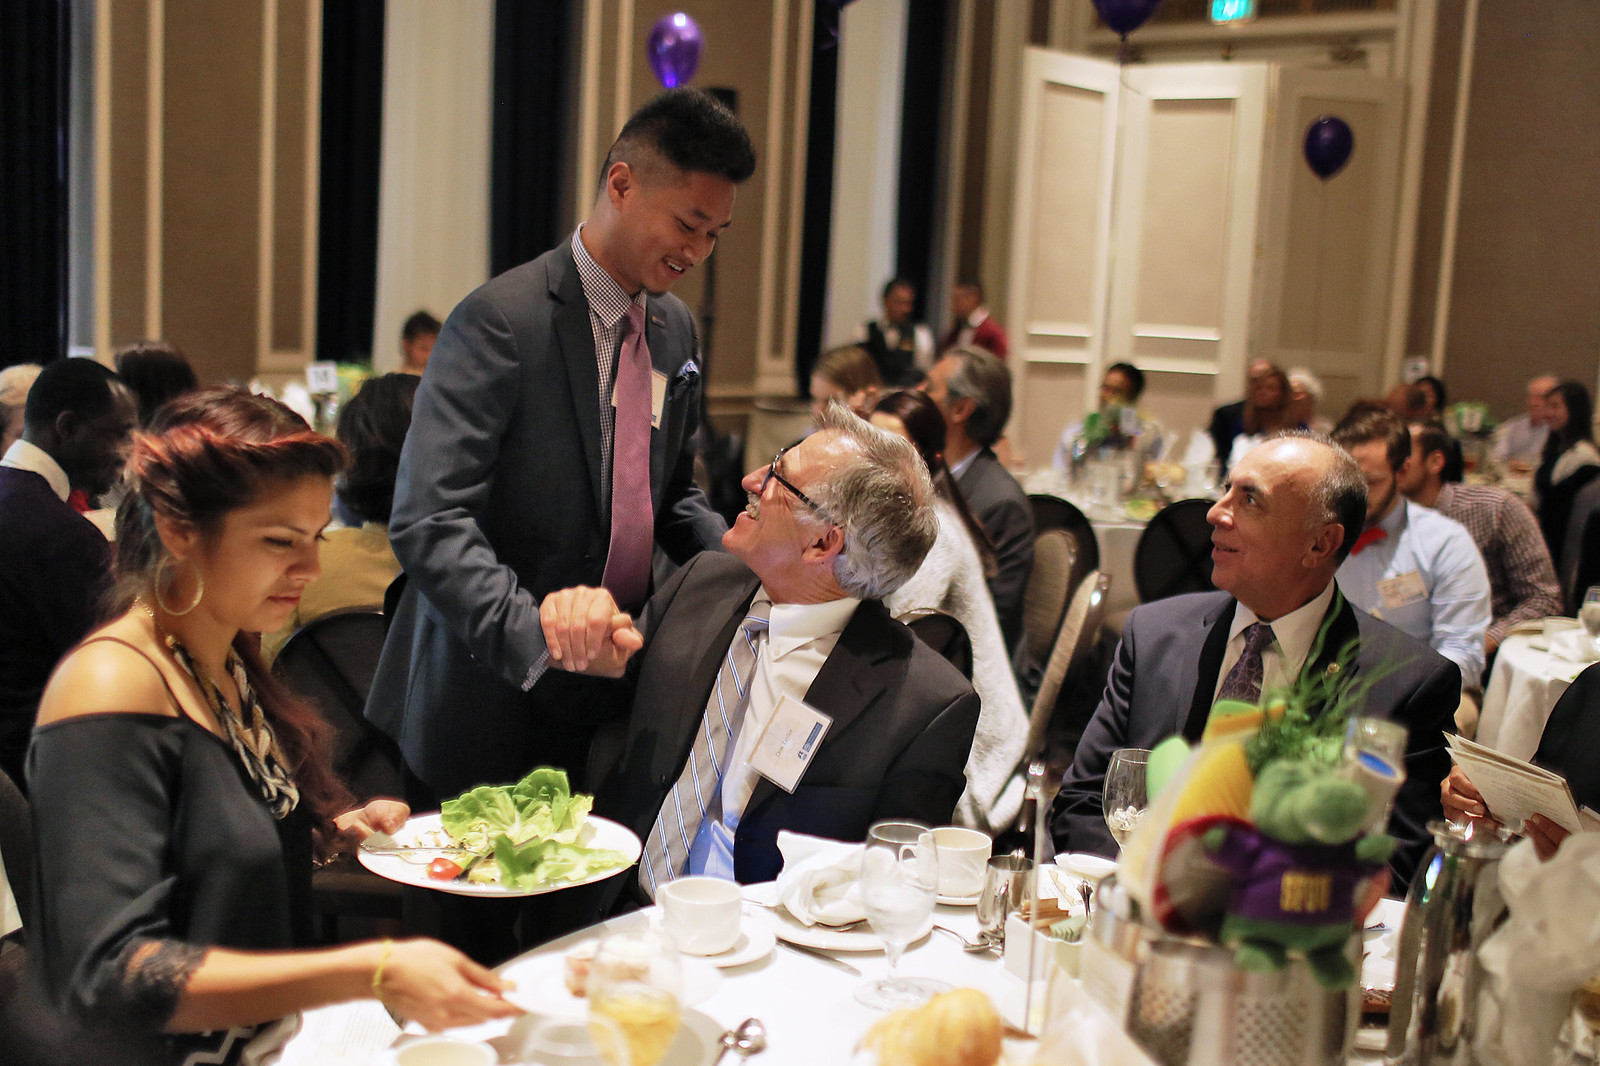 SF State alumni Sokhom Mao shakes hands with SF State Dean Don Taylor after Mao's speech during the5th annual Guardian Scholars Program Luncheon at the Sir Frances Drake Hotel on Oct 18. The Guardian Scholars Program is a SF State organization designed to help children in the foster care system transition into college life. Students in the Guardian Scholars Program have an 85 percent graduation rate. Photo by John Ornelas / Xpress